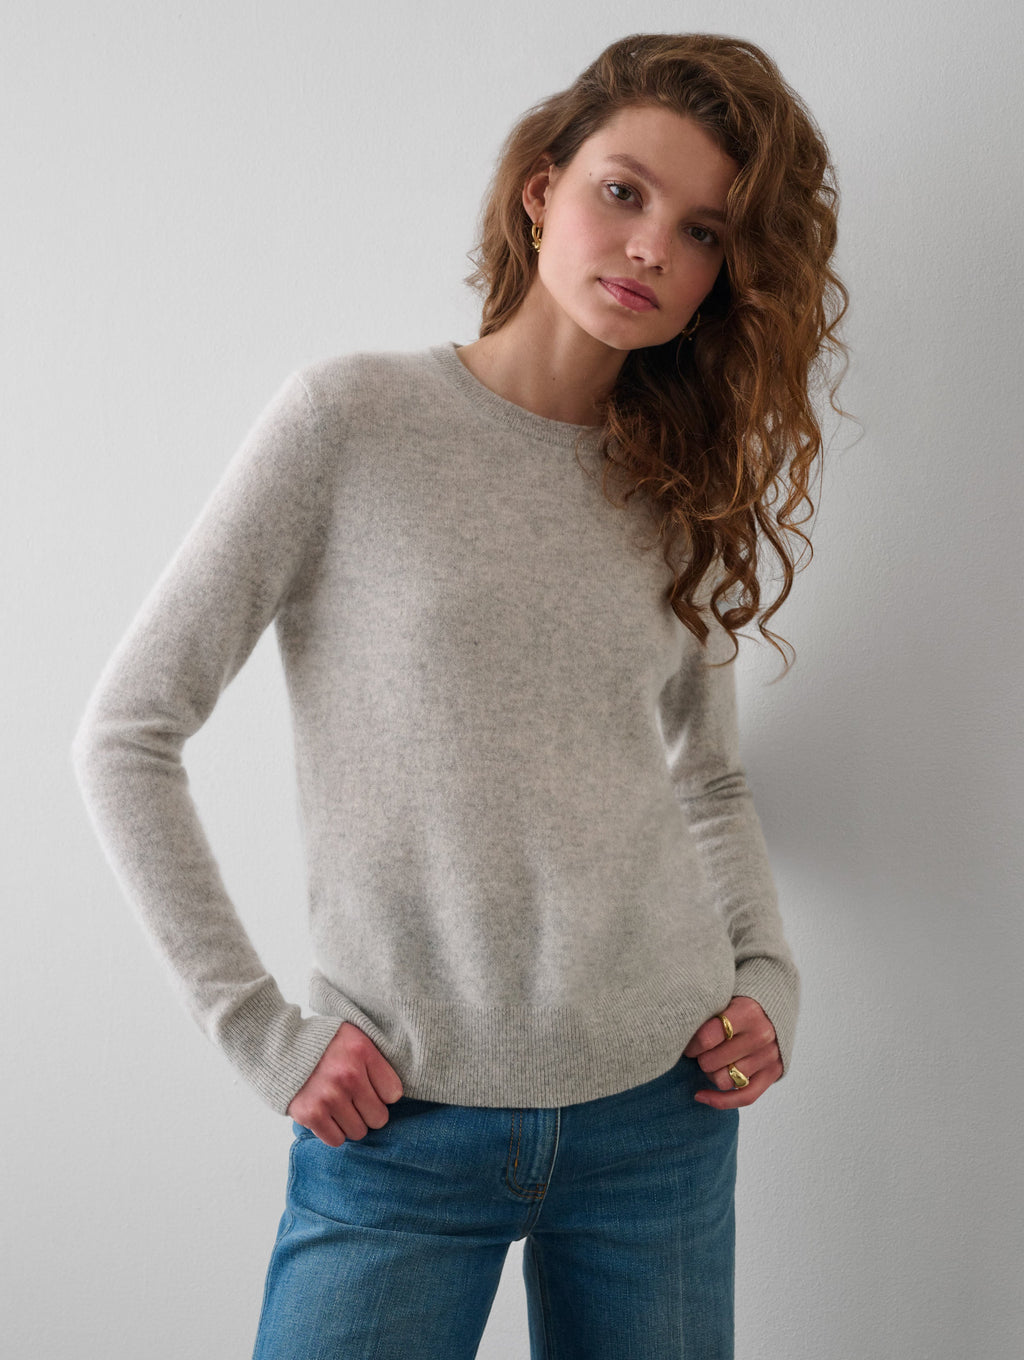 New arrivals daily! Whit + Warren Cashmere Sweater London Fog